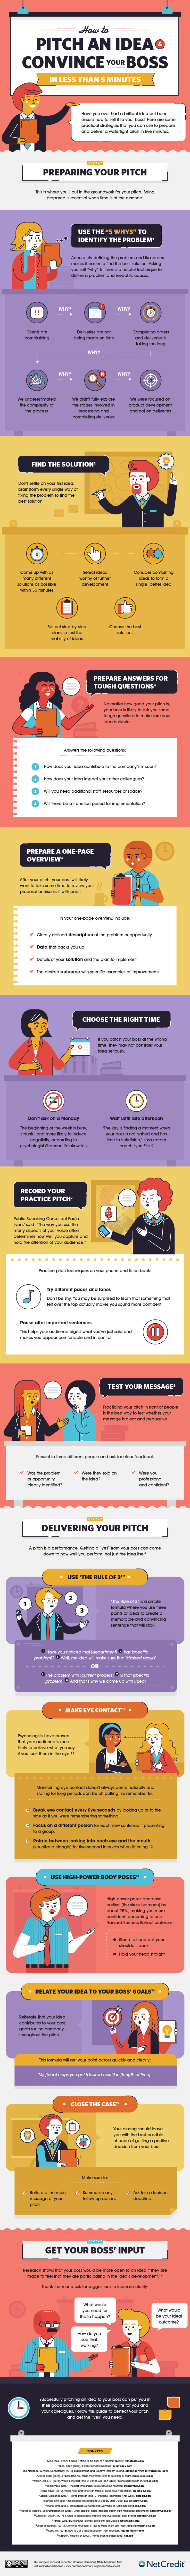 How to Pitch a New Idea to Your Boss Infographic